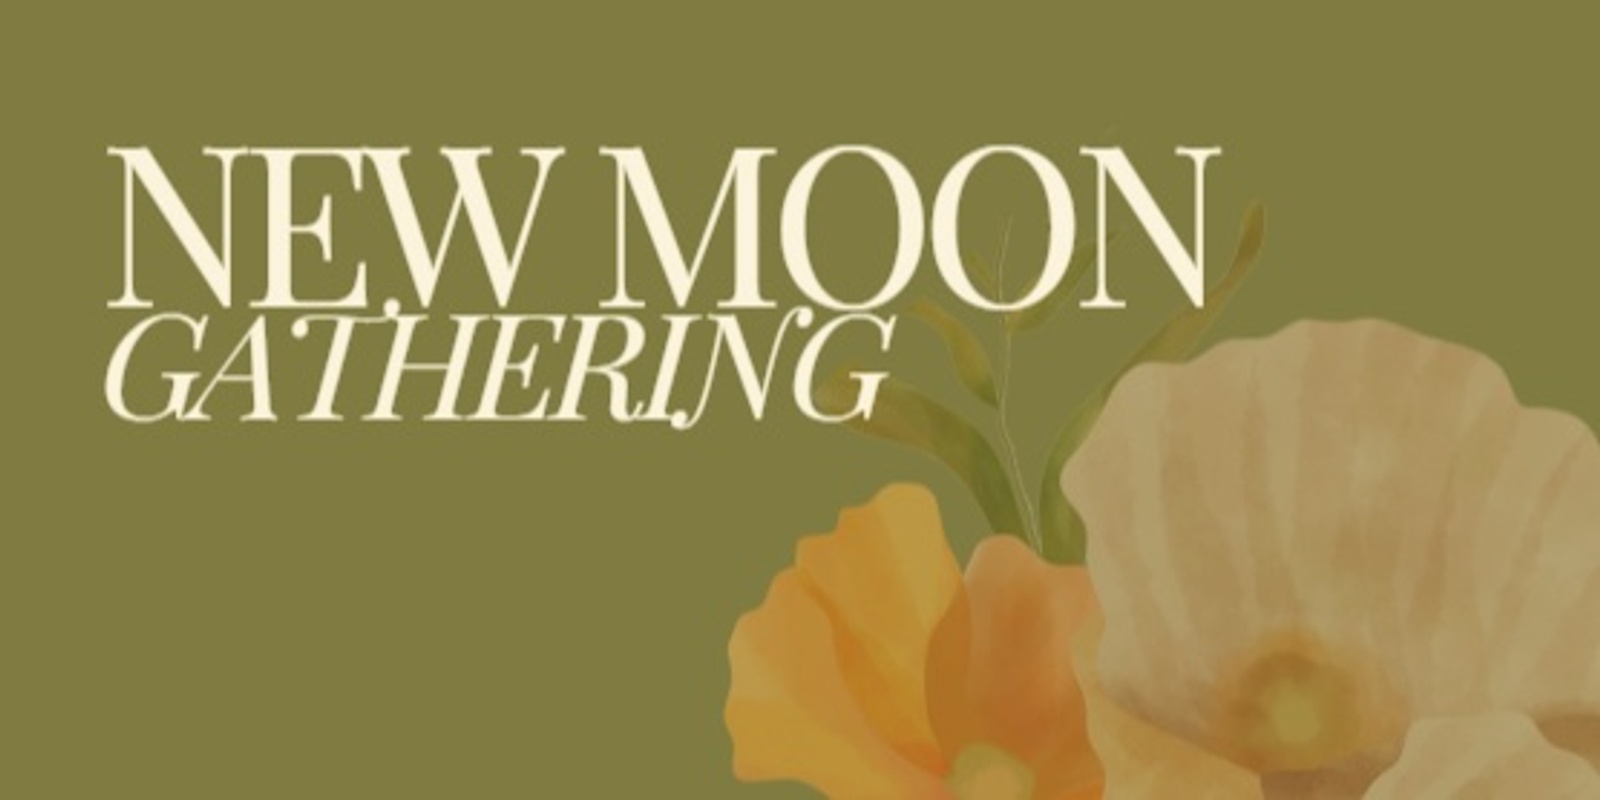 Banner image for New Moon Circle - Women's Gathering July